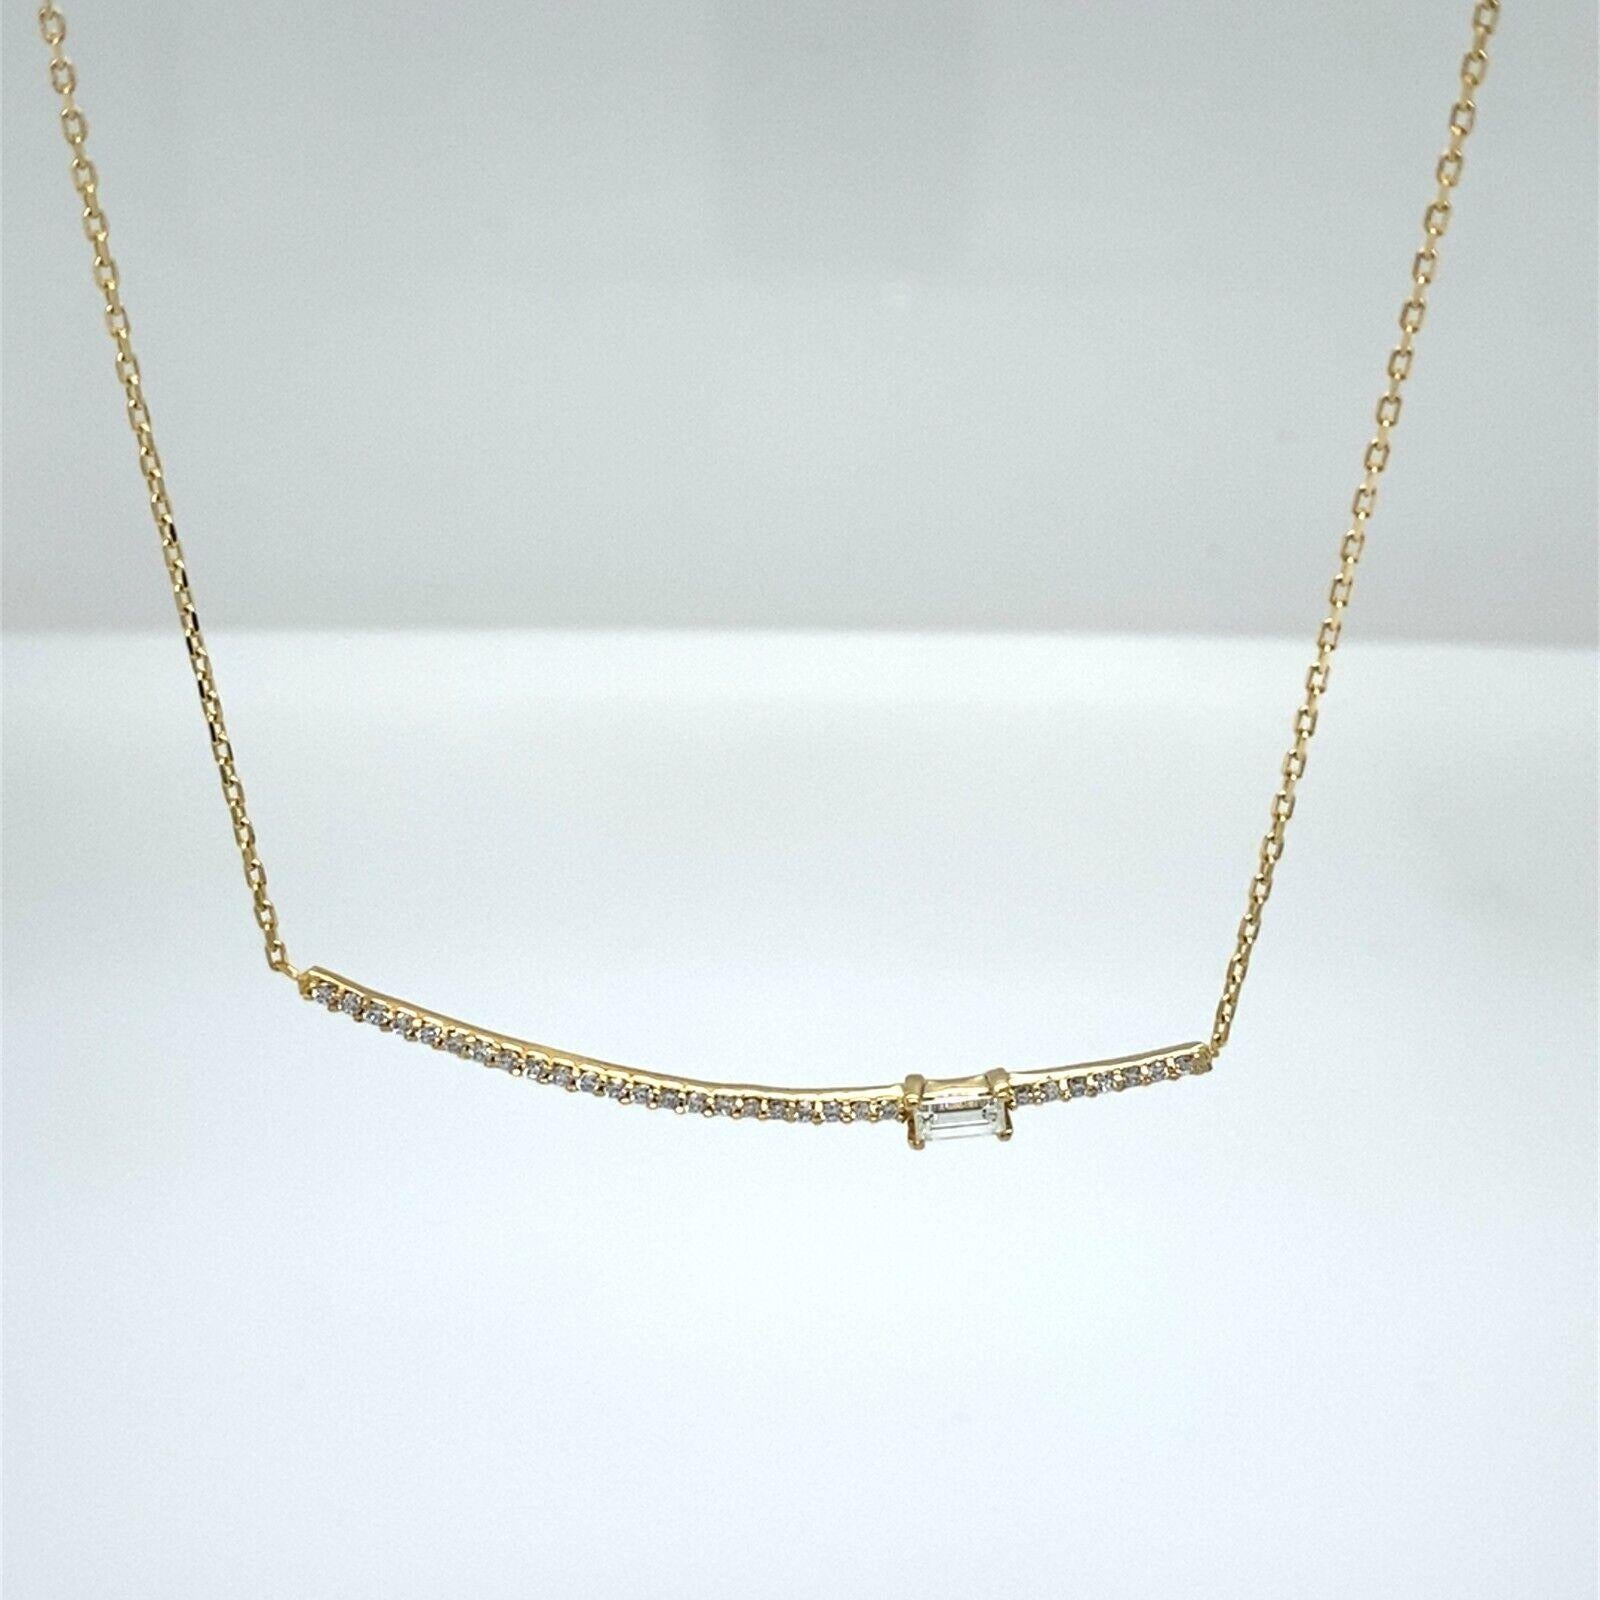 18ct Yellow Gold Diamond Necklace Set With 0.35ct Diamonds

This beautiful 18ct Yellow Gold Diamond necklace is set with 1 baguette Diamond & 30 small round brilliant cut Diamonds, with an 18 inch/18ct Yellow Gold chain. This stunning Diamond